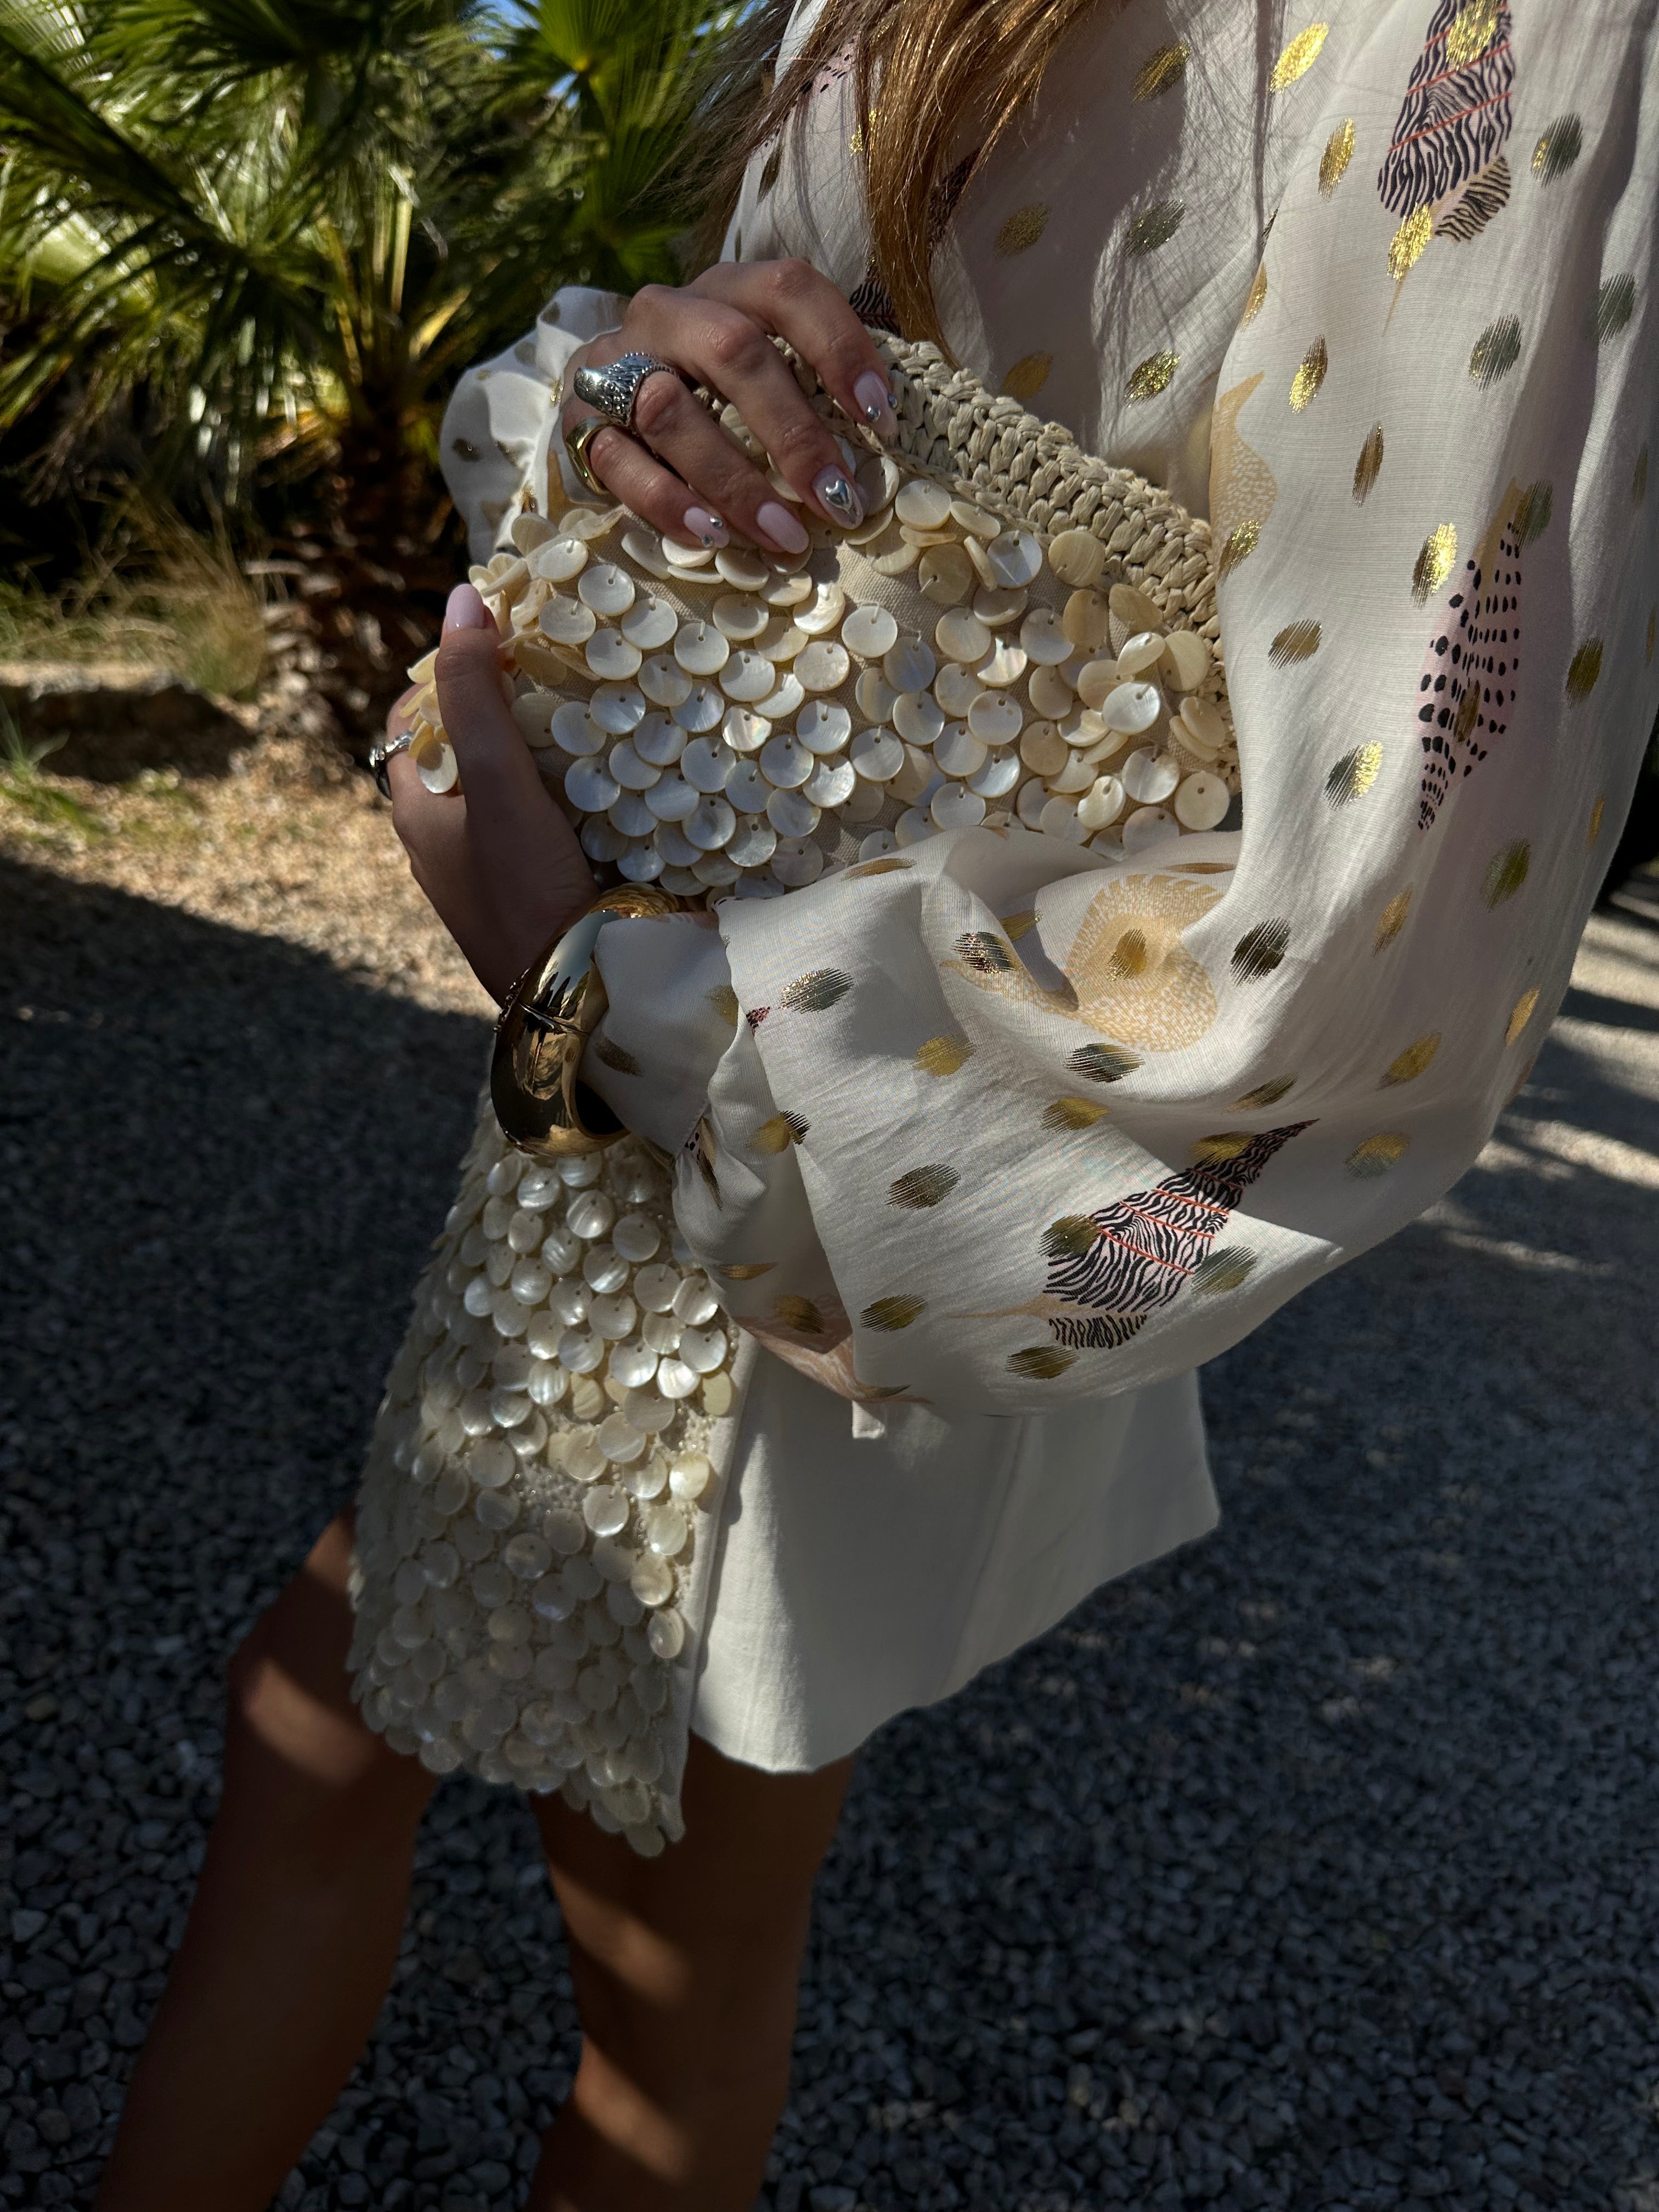 Shells Miley Shirt with Gold fleck